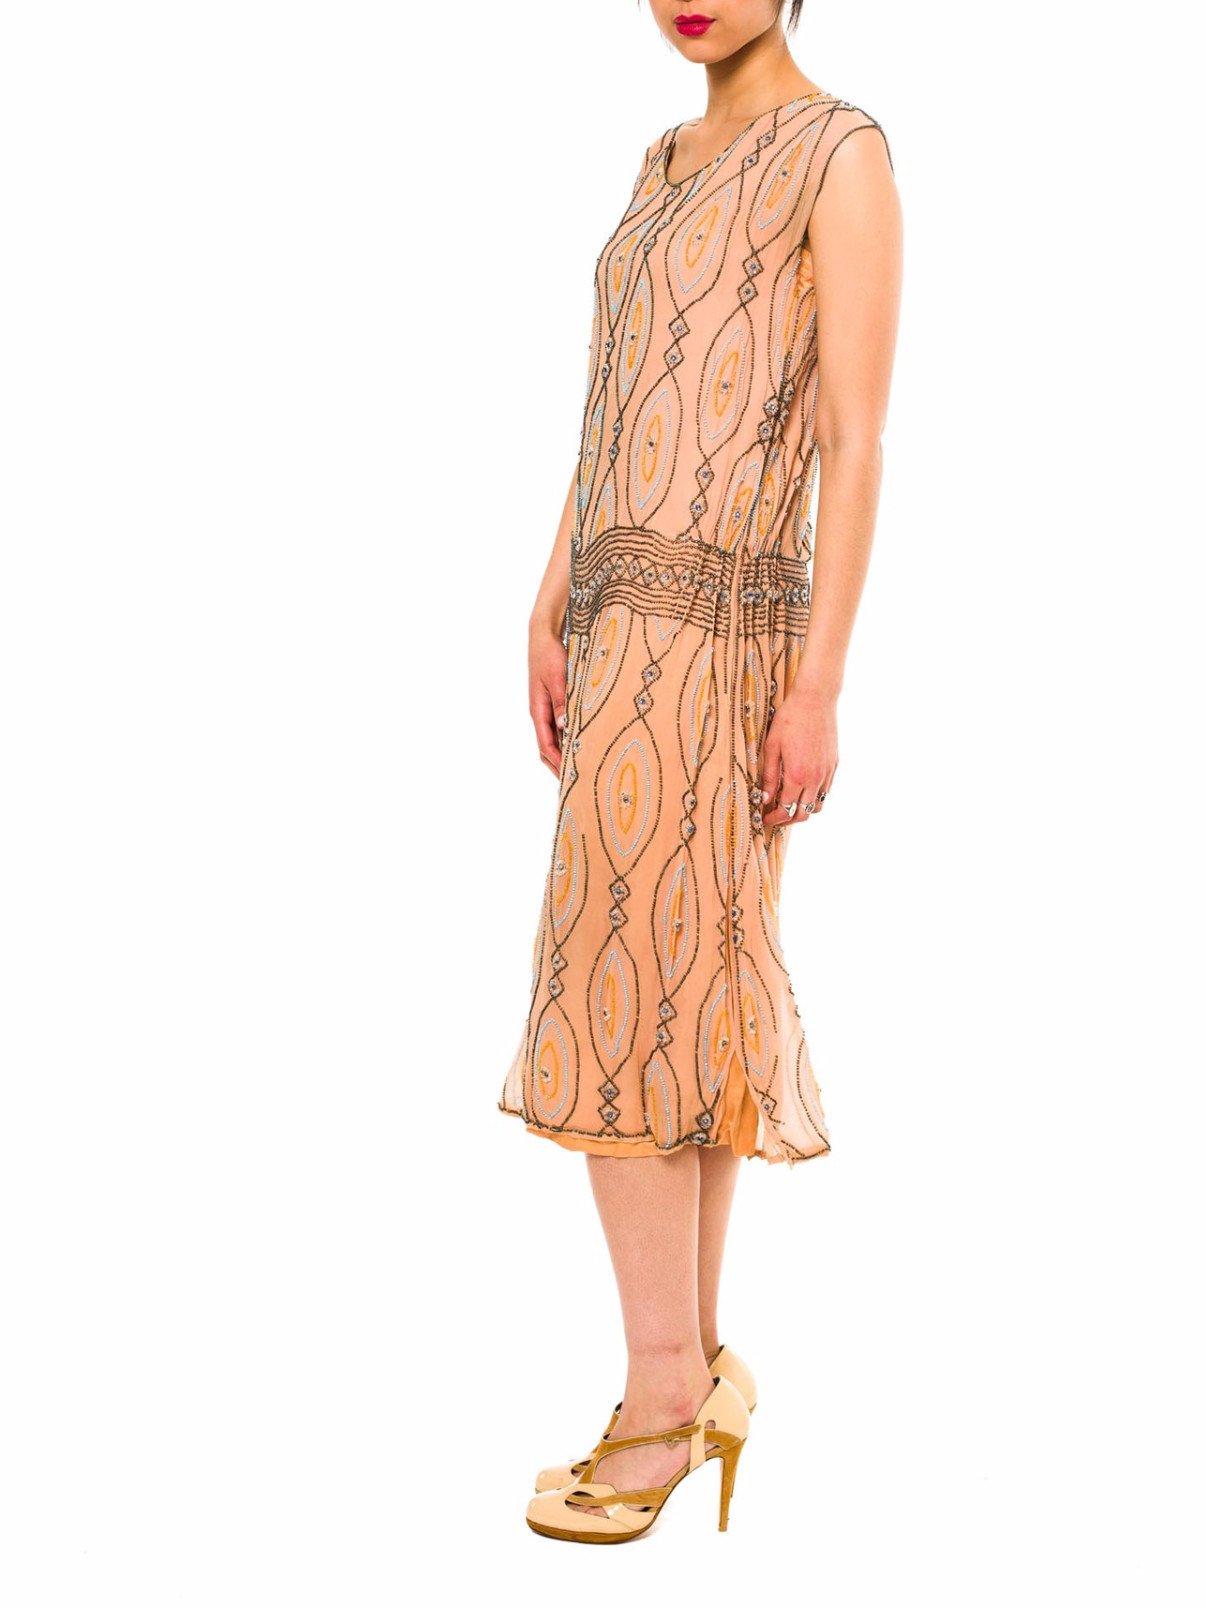 Dress has some damage and repaired areas at both shoulders and armholes. See detail images for reference.  1920S Peach Beaded Silk Chiffon Art Deco Flapper Cocktail Dress 